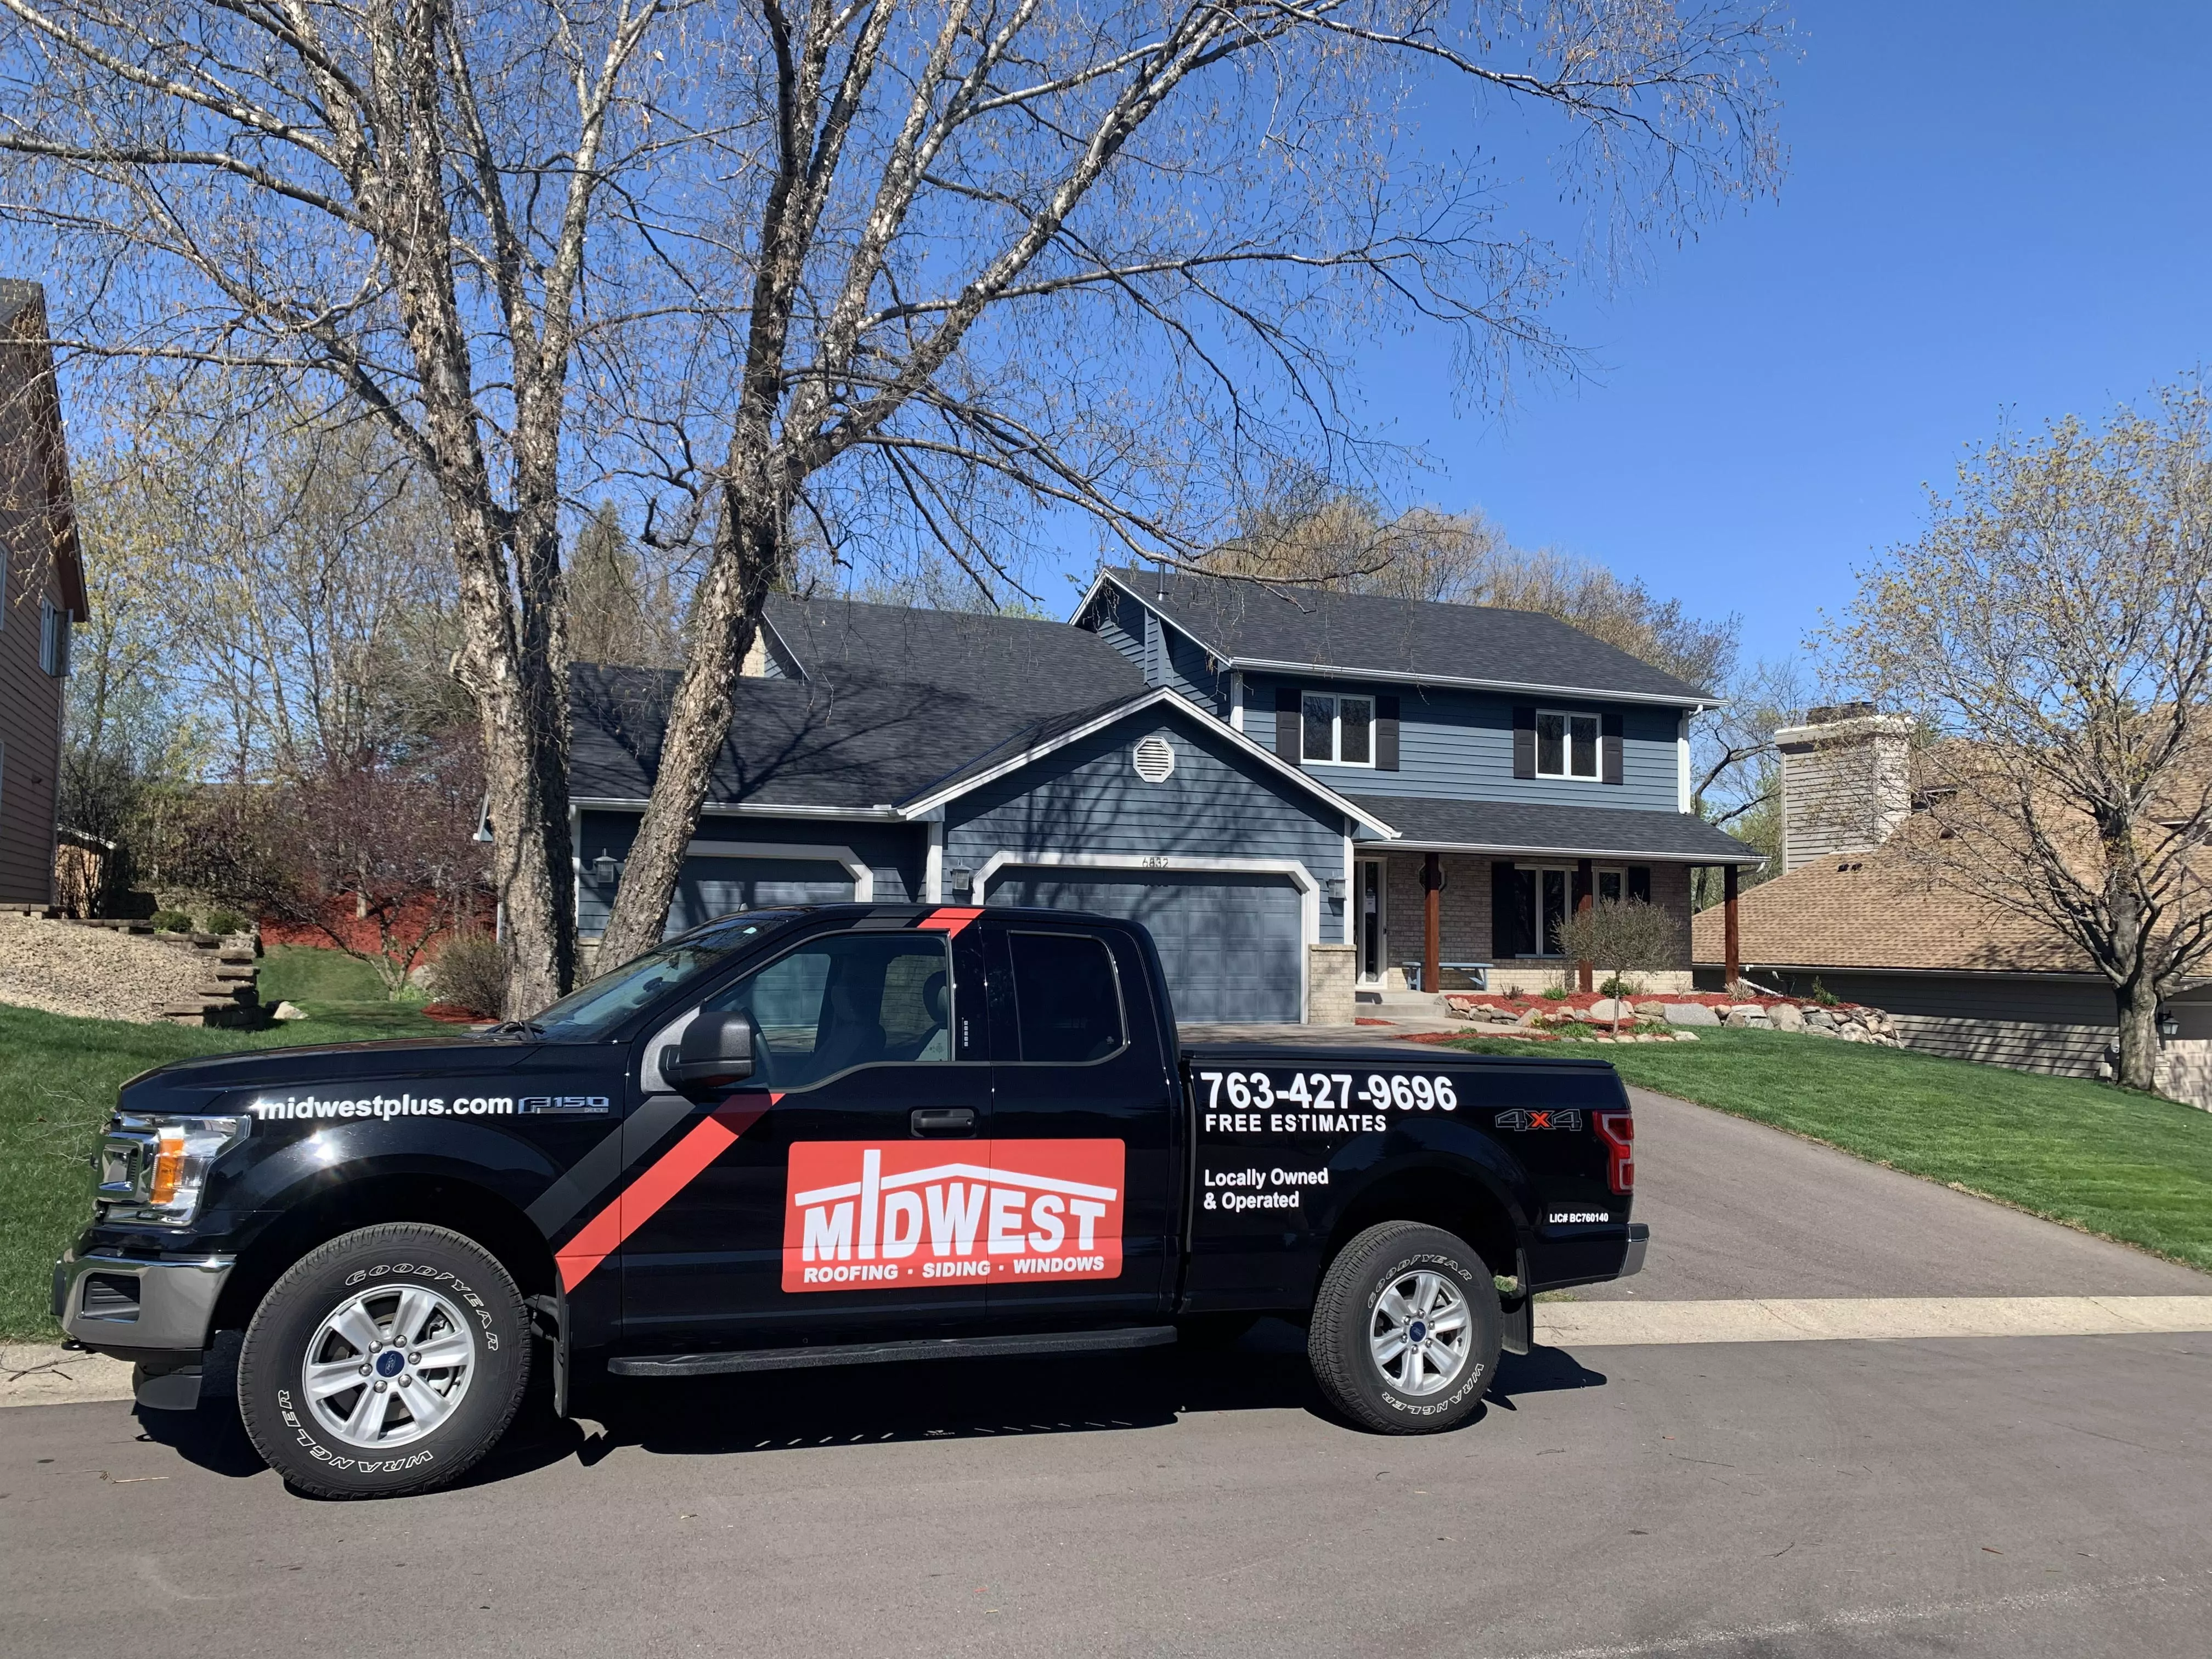 A Midwest Roofing, Siding & Windows service vehicle in front of a home with a new roof and new siding.